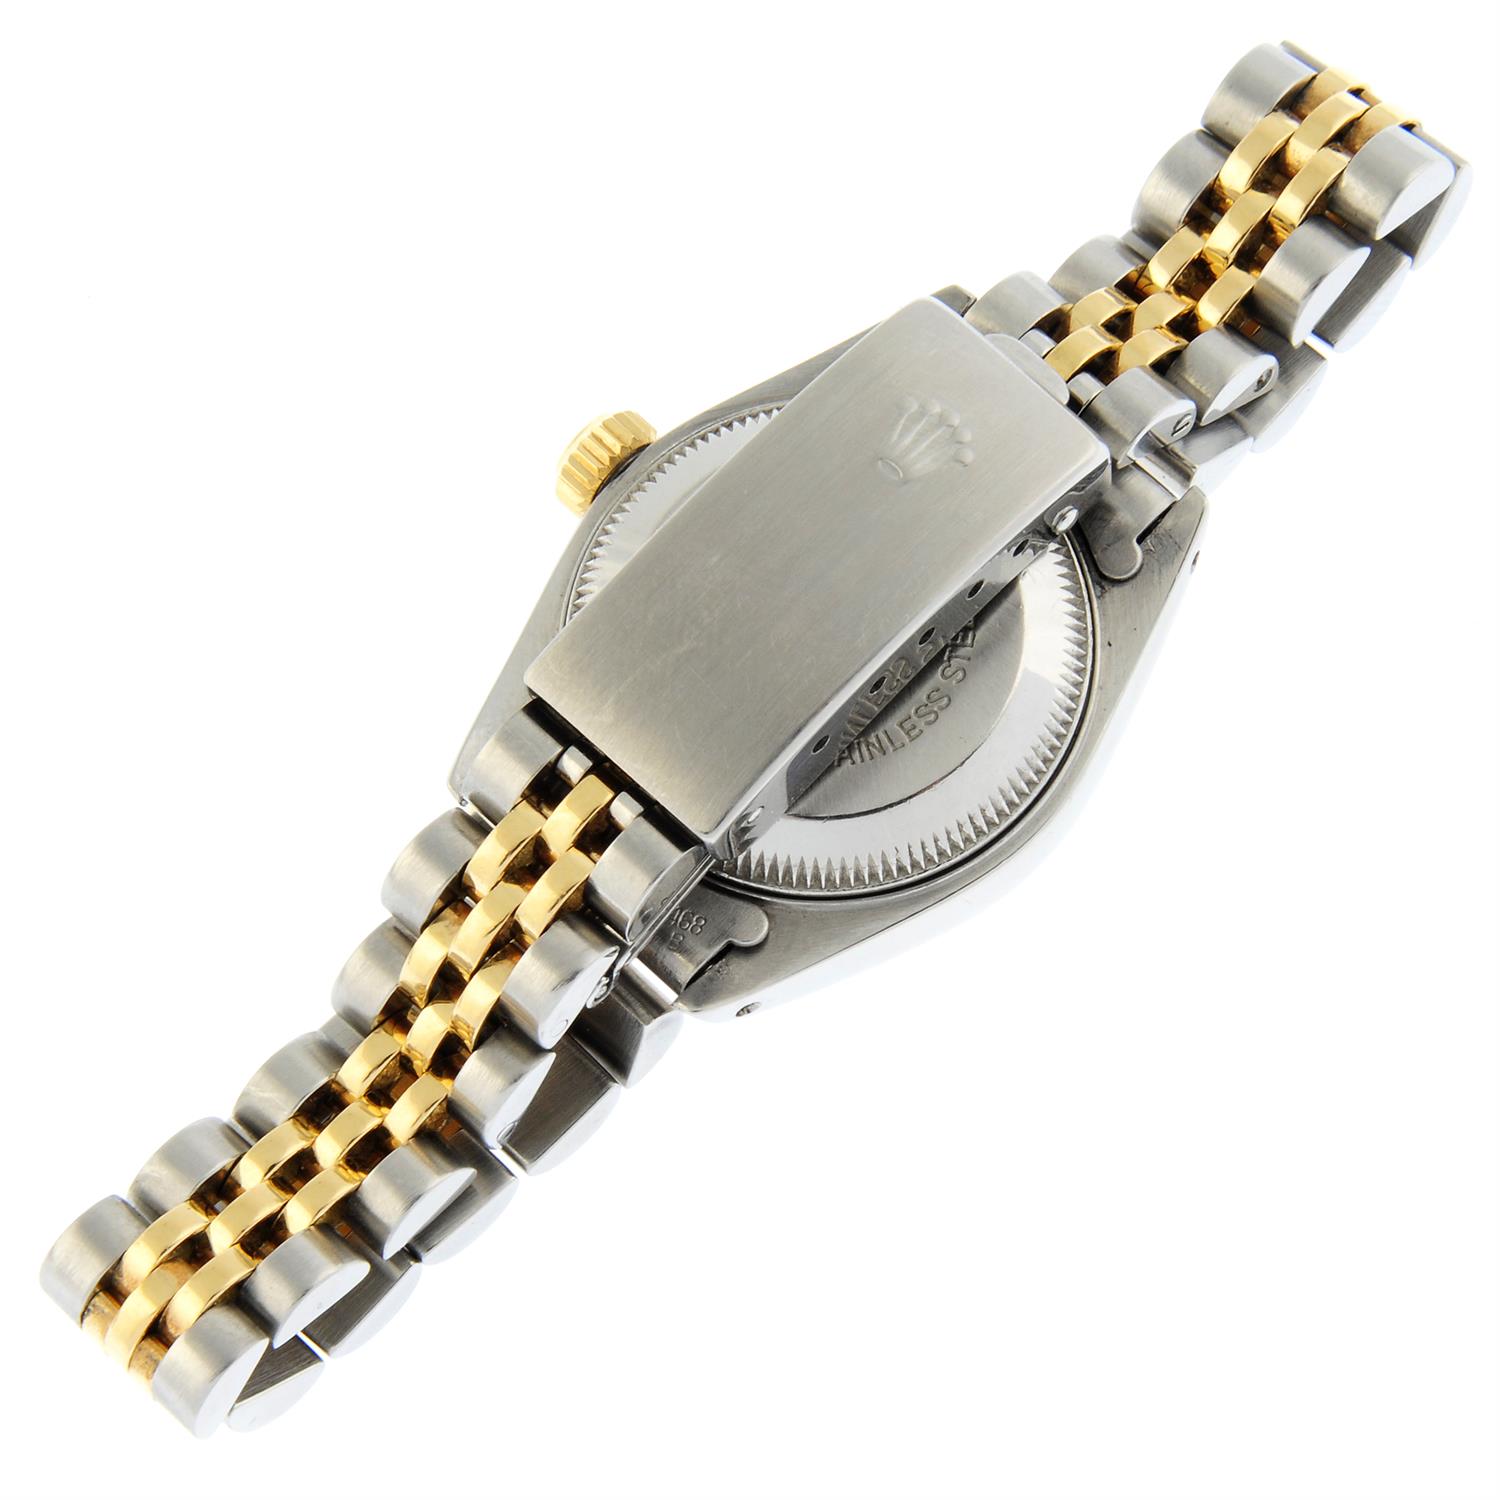 Rolex - an Oyster Perpetual Datejust watch, 26mm. - Image 2 of 4